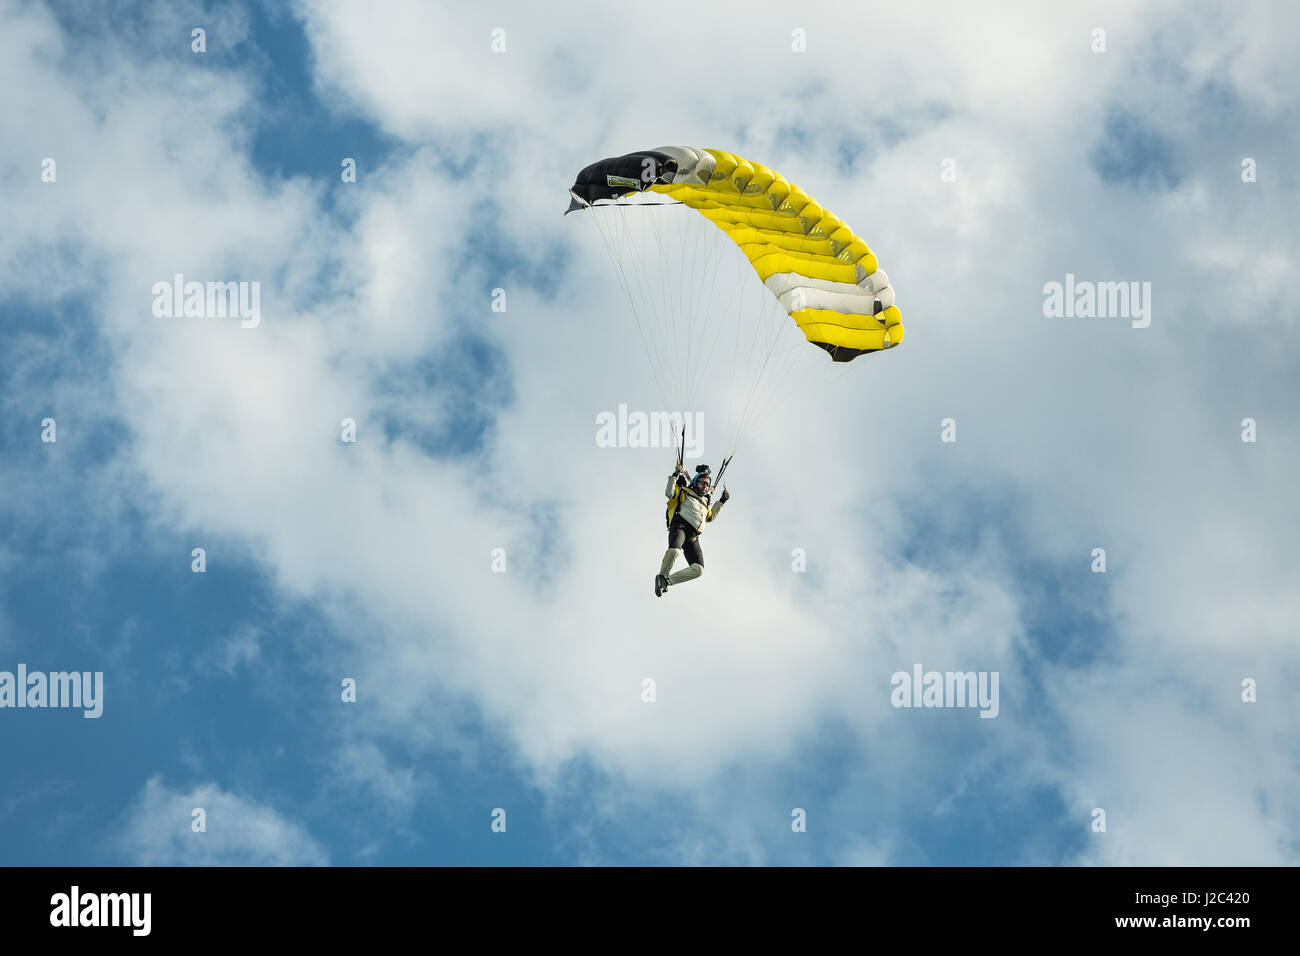 Pribram, CZE - August 19, 2016. Yellow paraglider flying against the cloudy sky in Pribram airport, Czech Republic Stock Photo